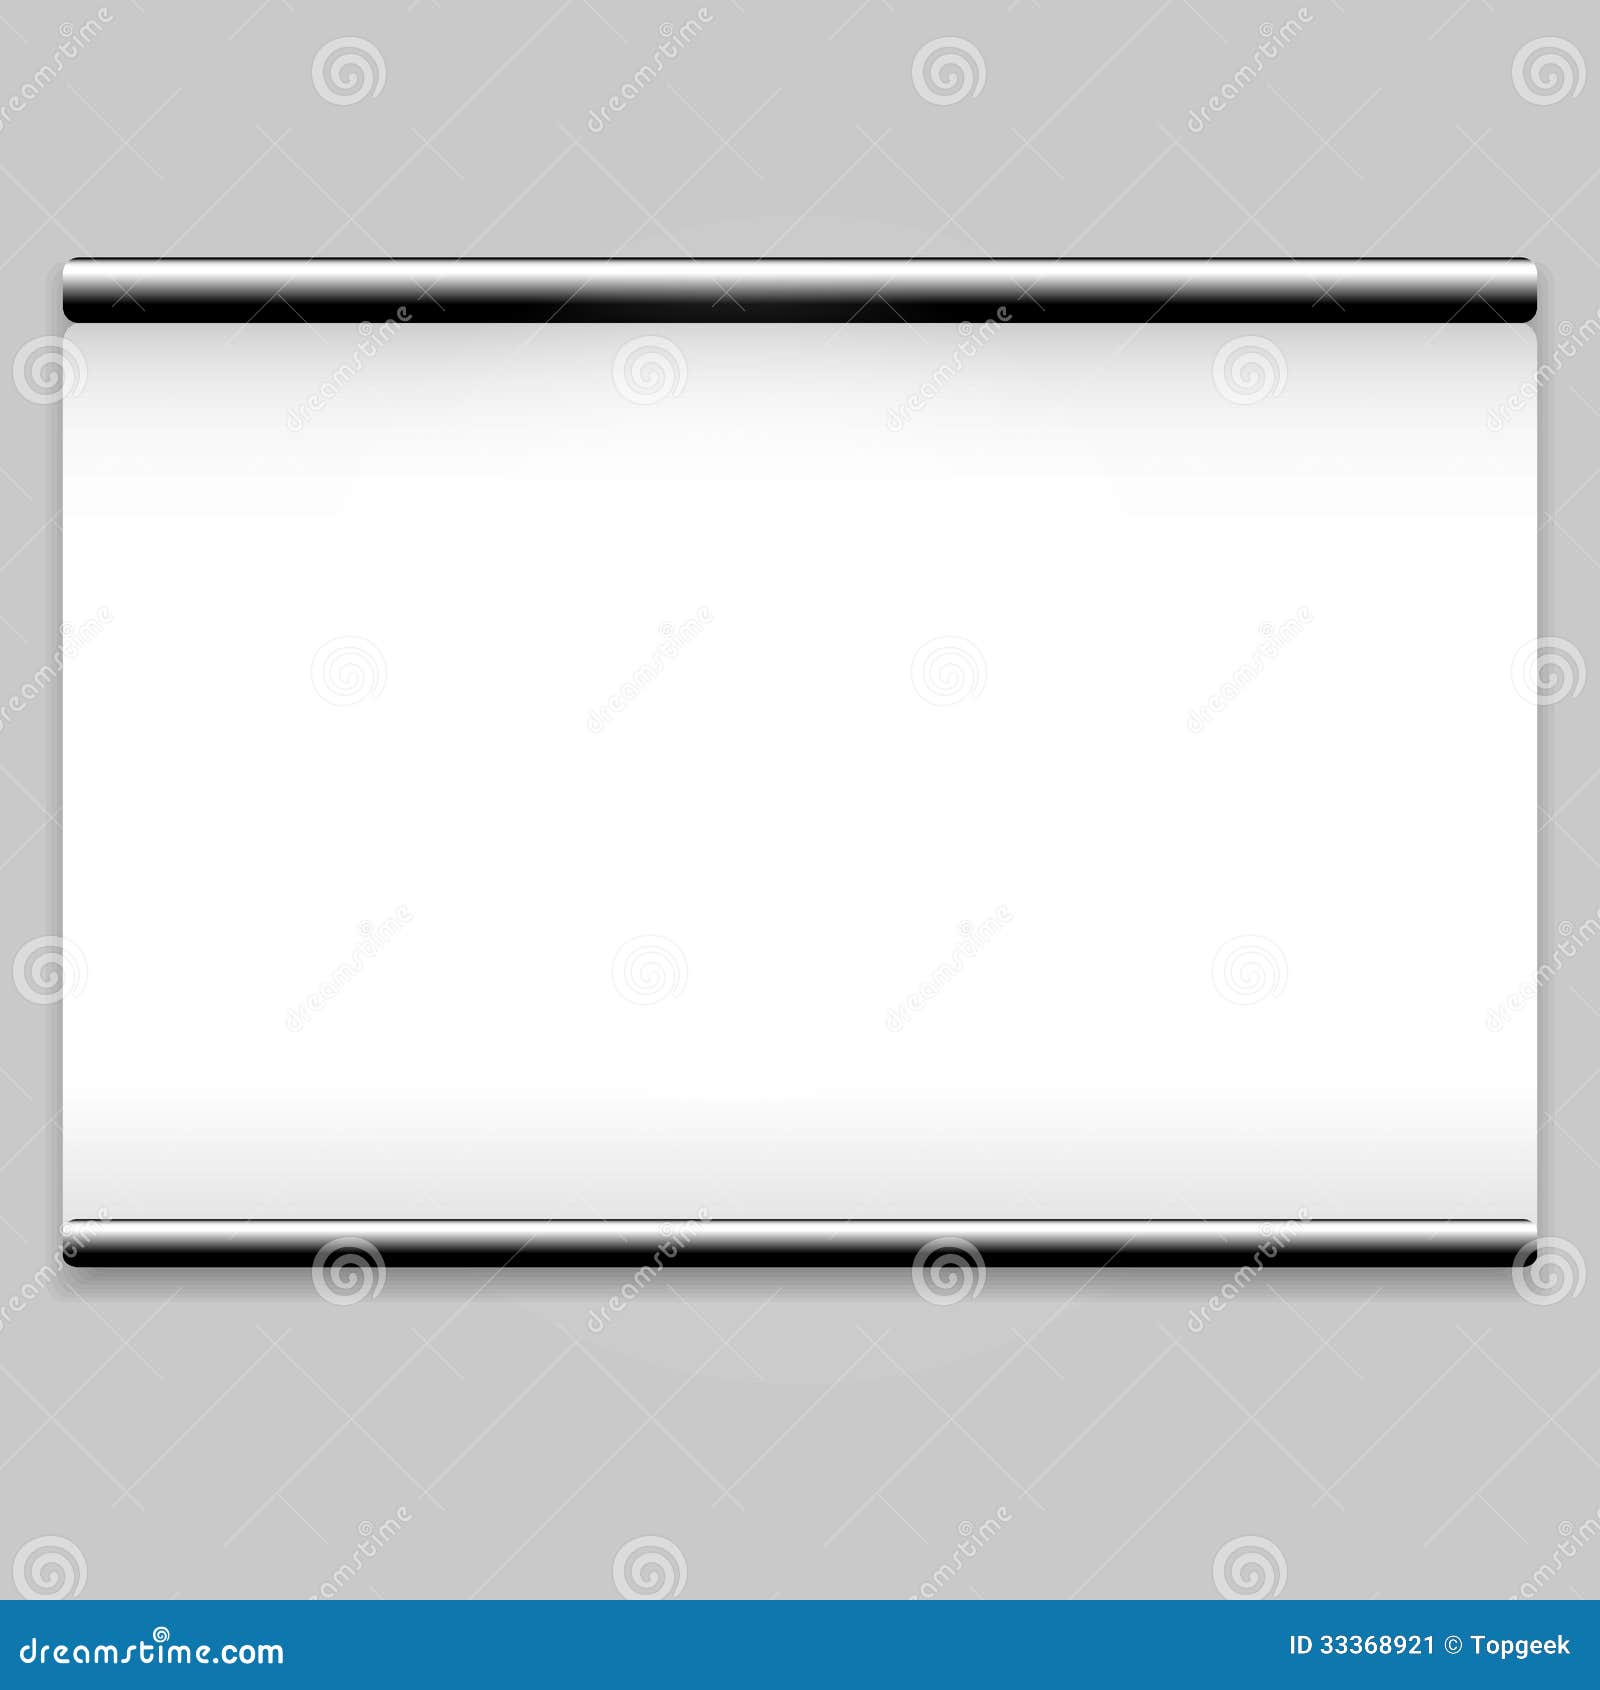 List 101+ Images show me a picture of a white screen Updated